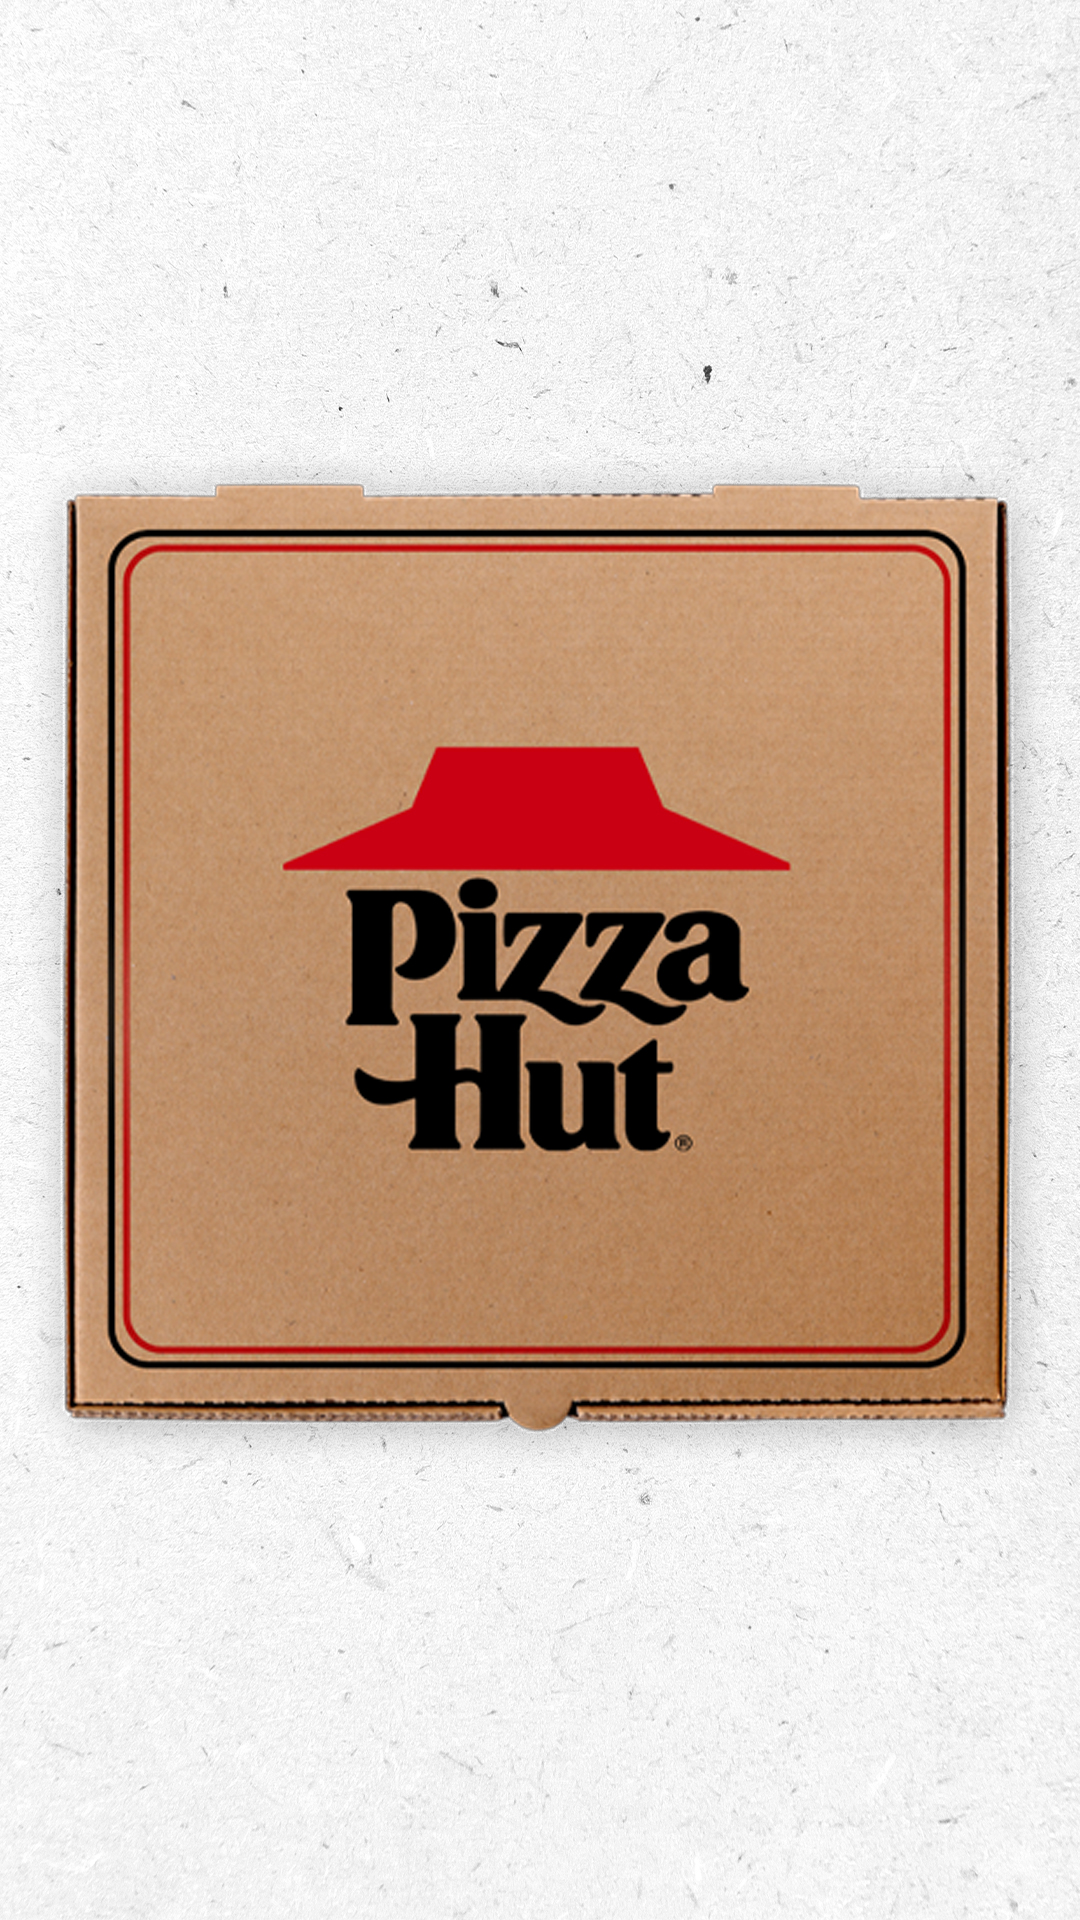 Source Empty 9 Pizza Hut Box With Your Own Design And Own Color on  m.